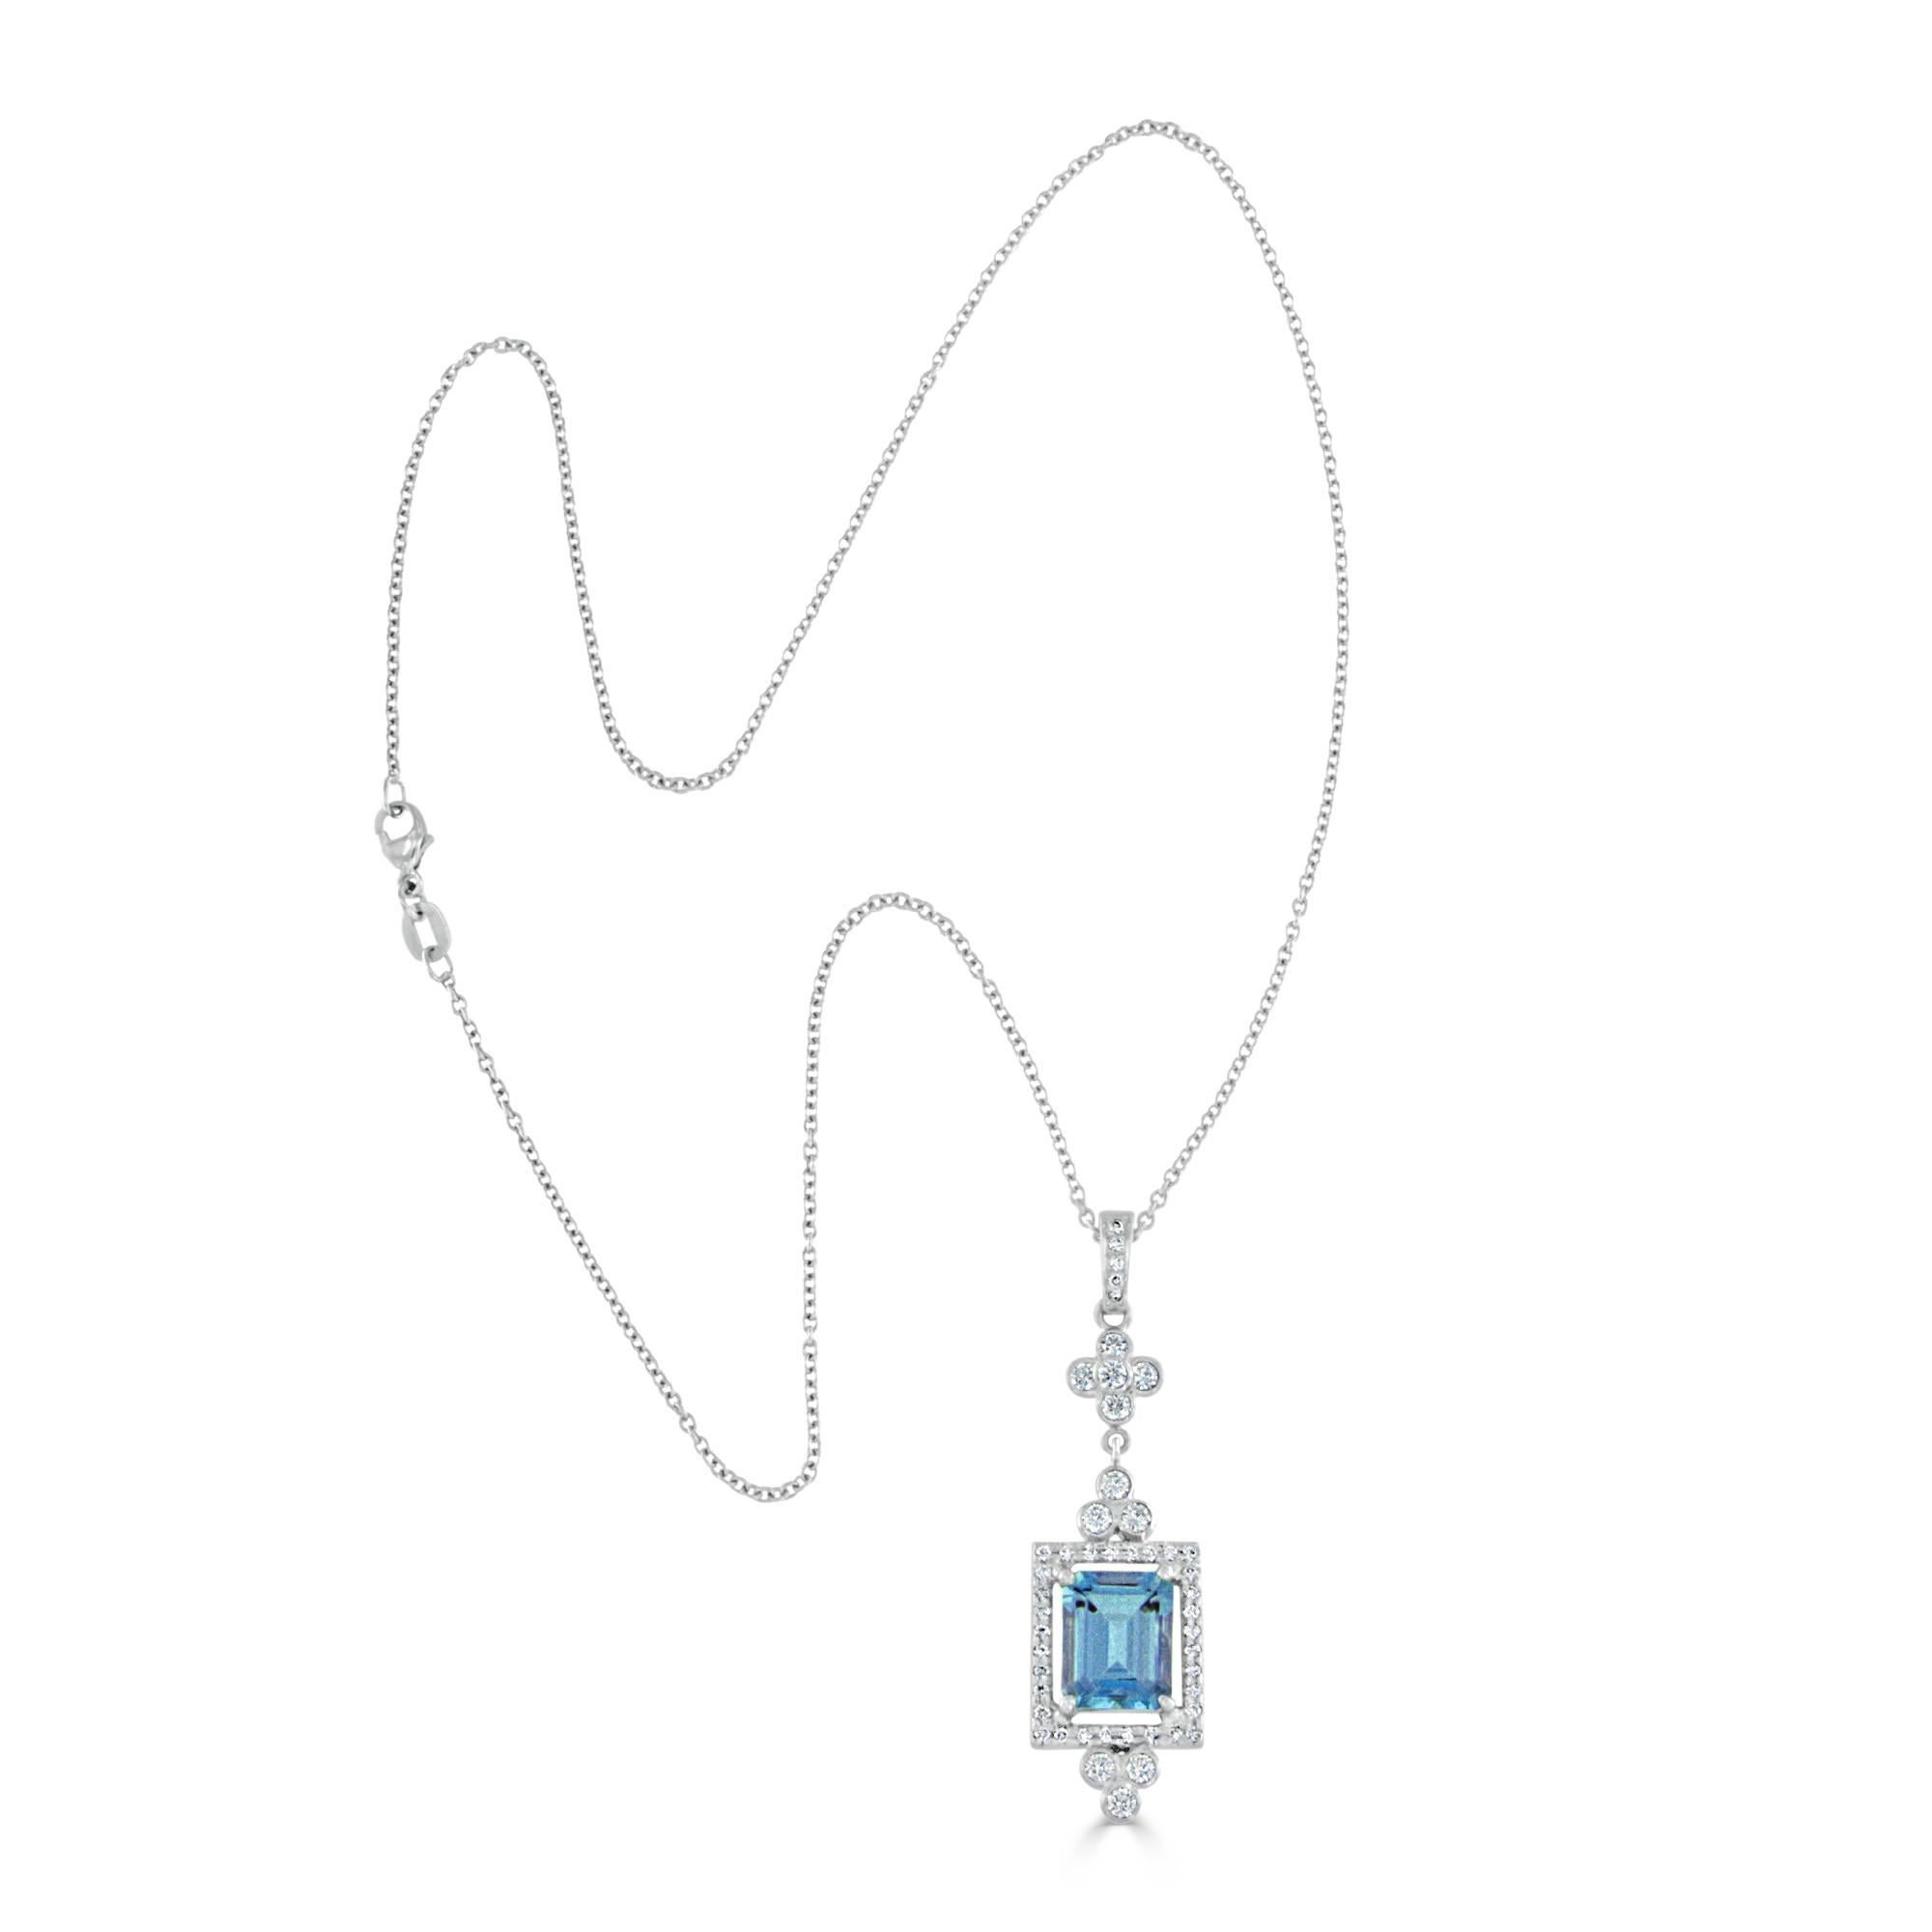 This beautiful aquamarine and diamond platinum pendant features an emerald cut aquamarine weighing 2.92 carats, having very fine cut and color. Set with 47- round brilliant cut diamonds weighing 0.94 carats total, having VS2 clarity, G color and